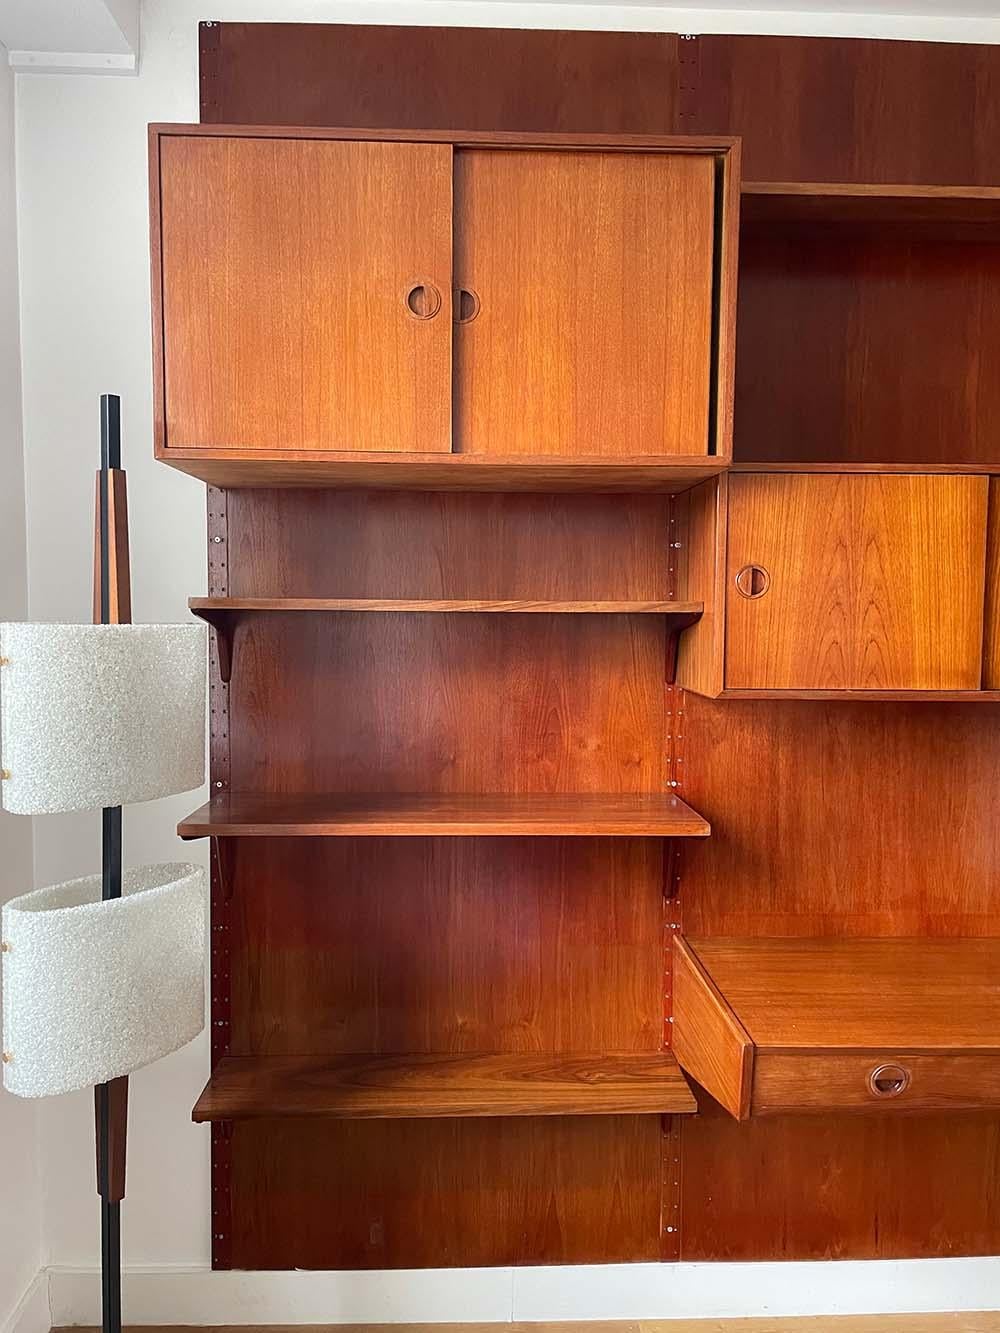 Danish modular bookcase in teak from the 1960s. It is manufactured by Hansen & Guldborg Møbler in Denmark. Its simplicity and adaptability is typical of the Scandinavian design close to the models of Poul Cadovius. Every element can be placed